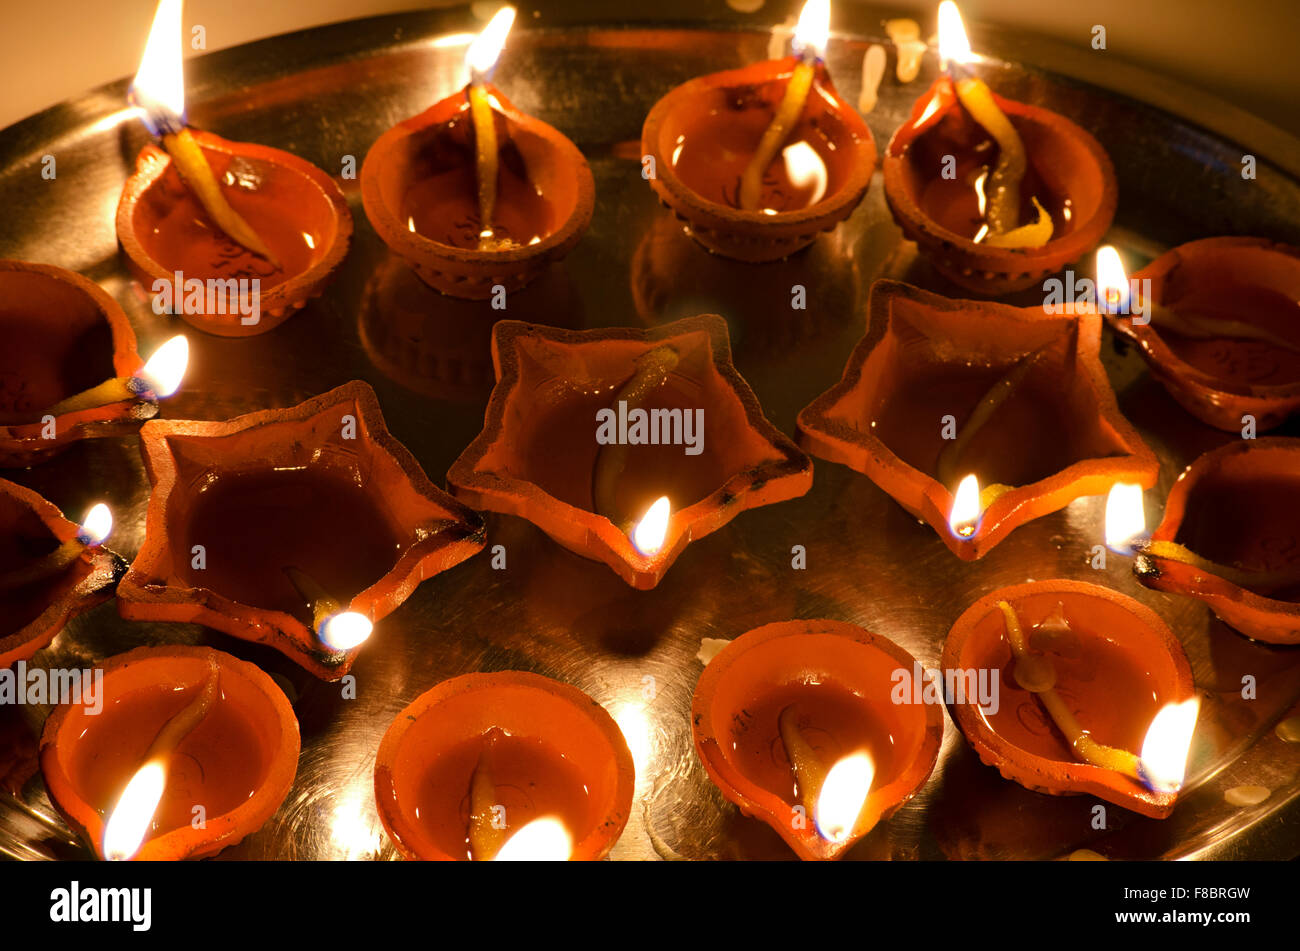 Lamps lit for Diwali Puja, an important Hindu festival, which symbolizes victory of good over evil. Stock Photo